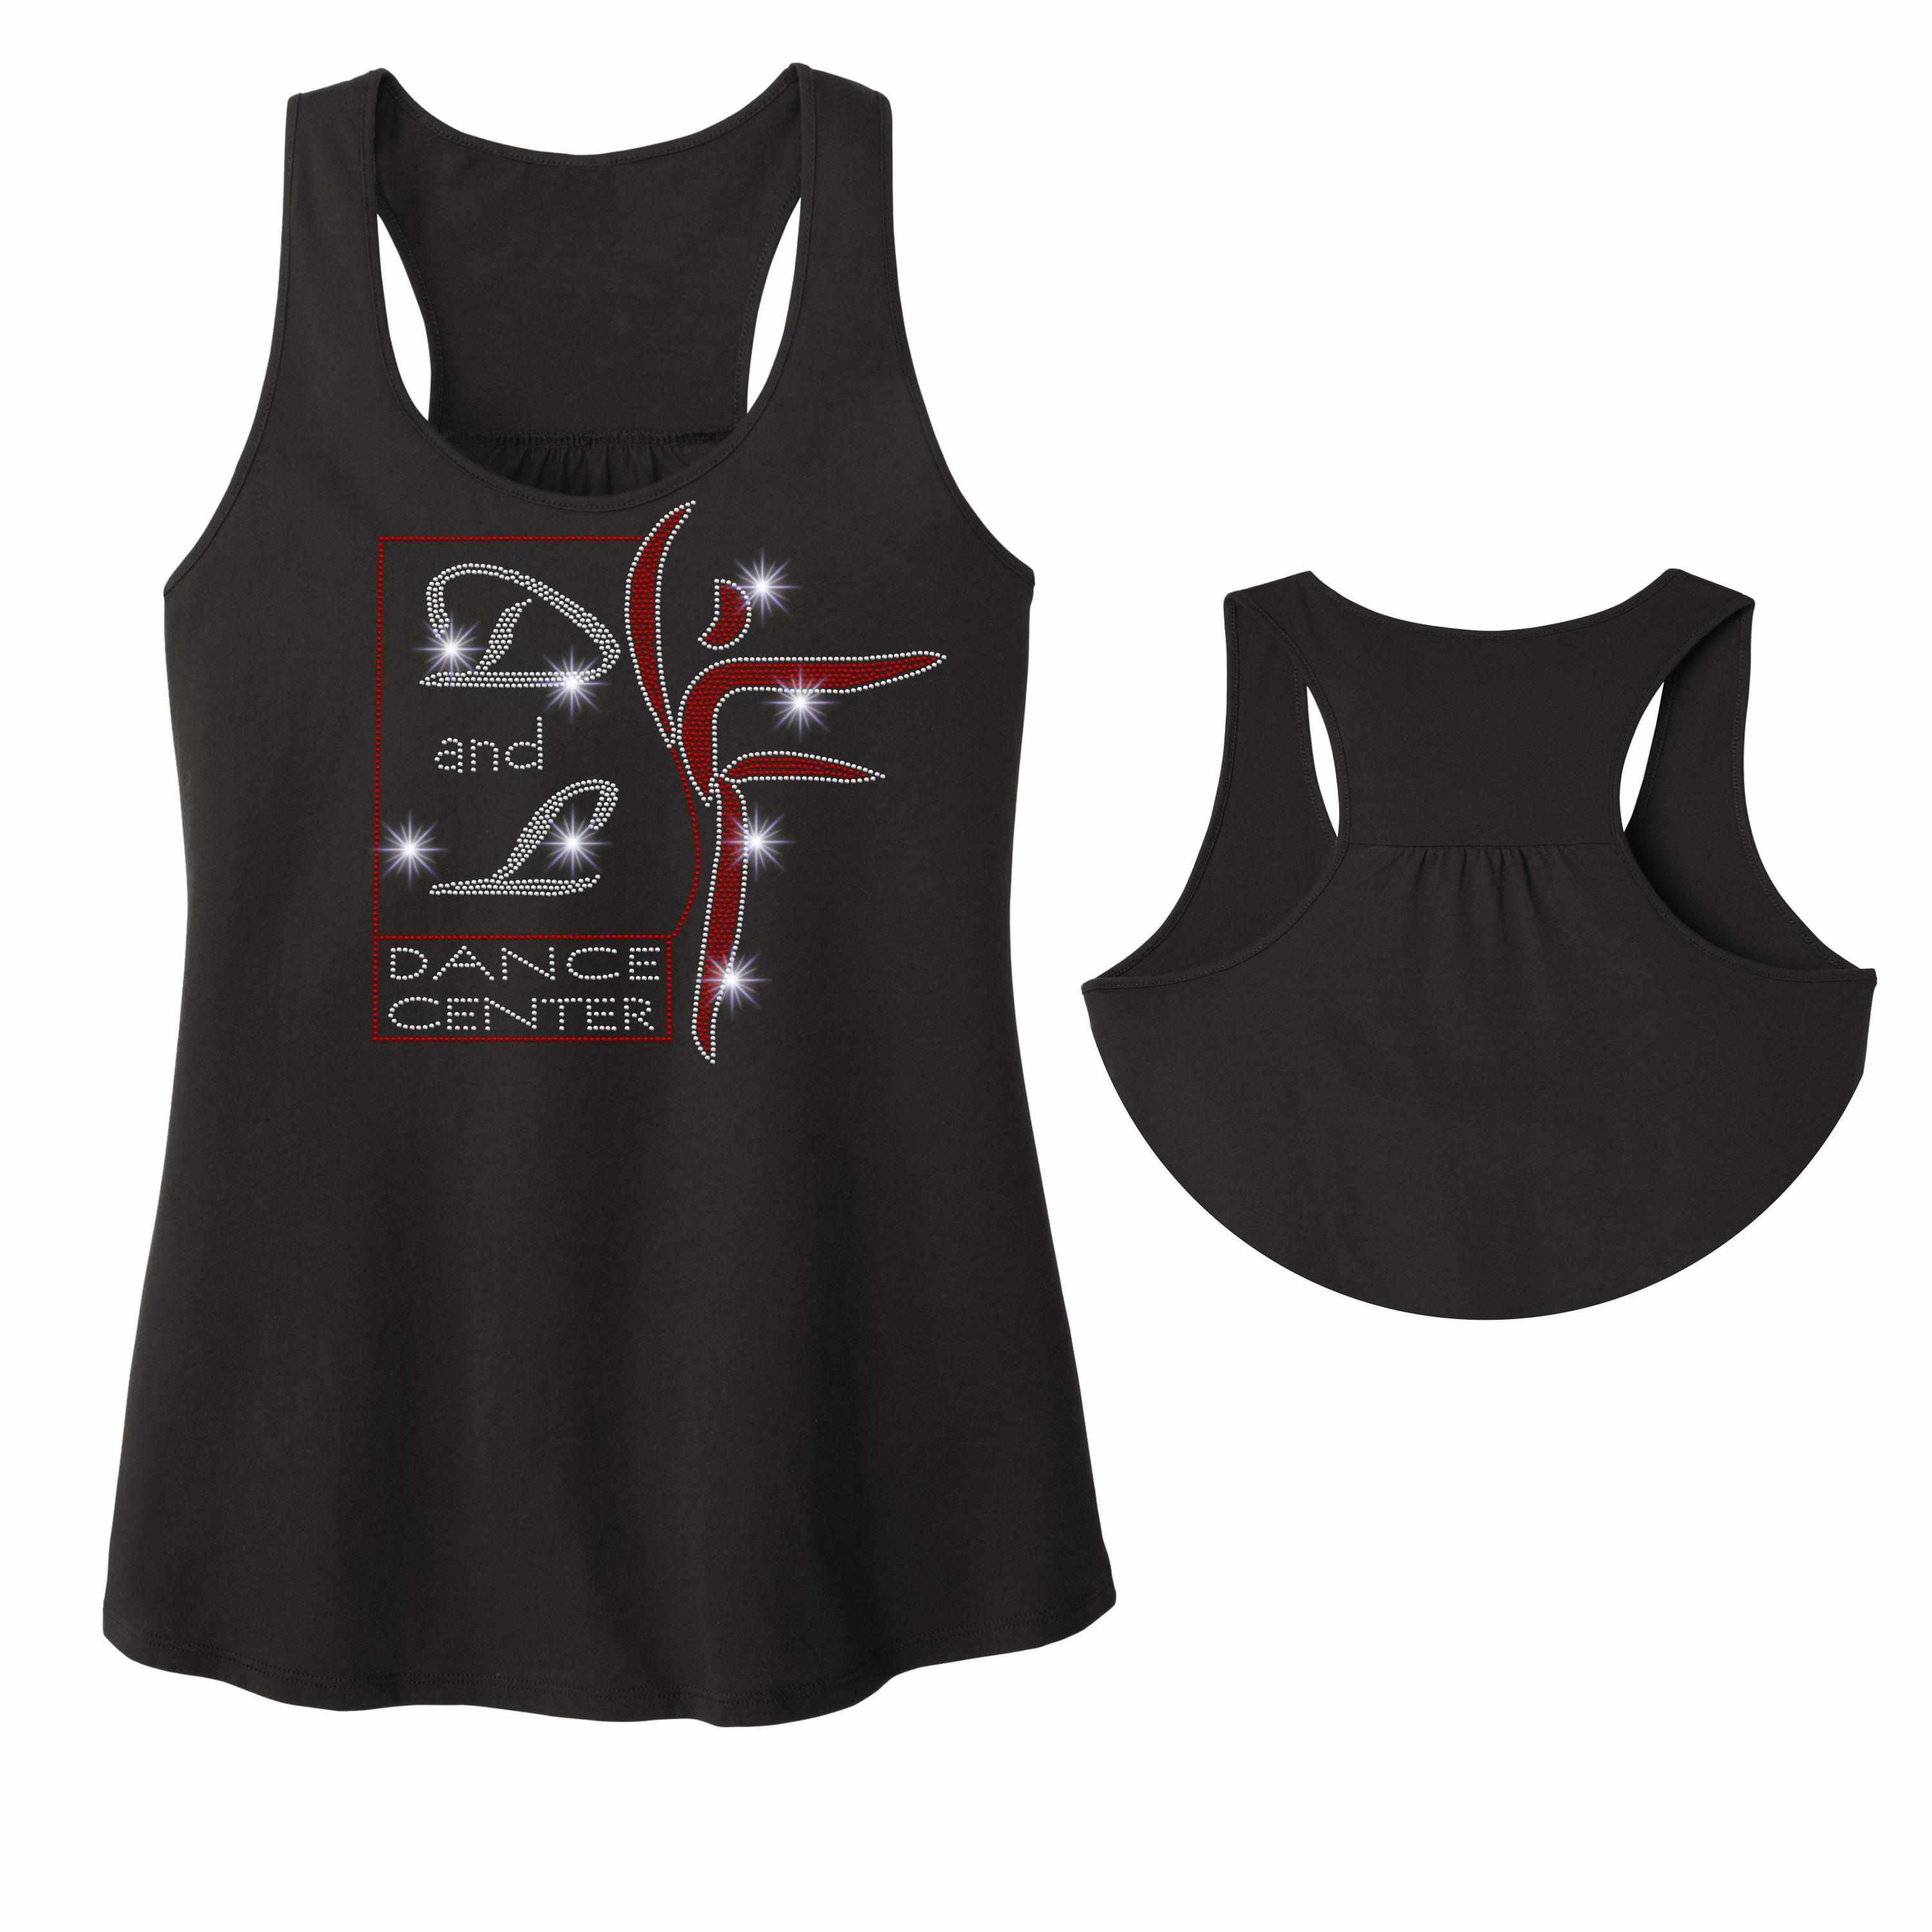 D and L Dance Center Ladies RacerBack Tank ladies racerback tank Becky's Boutique Extra Small 